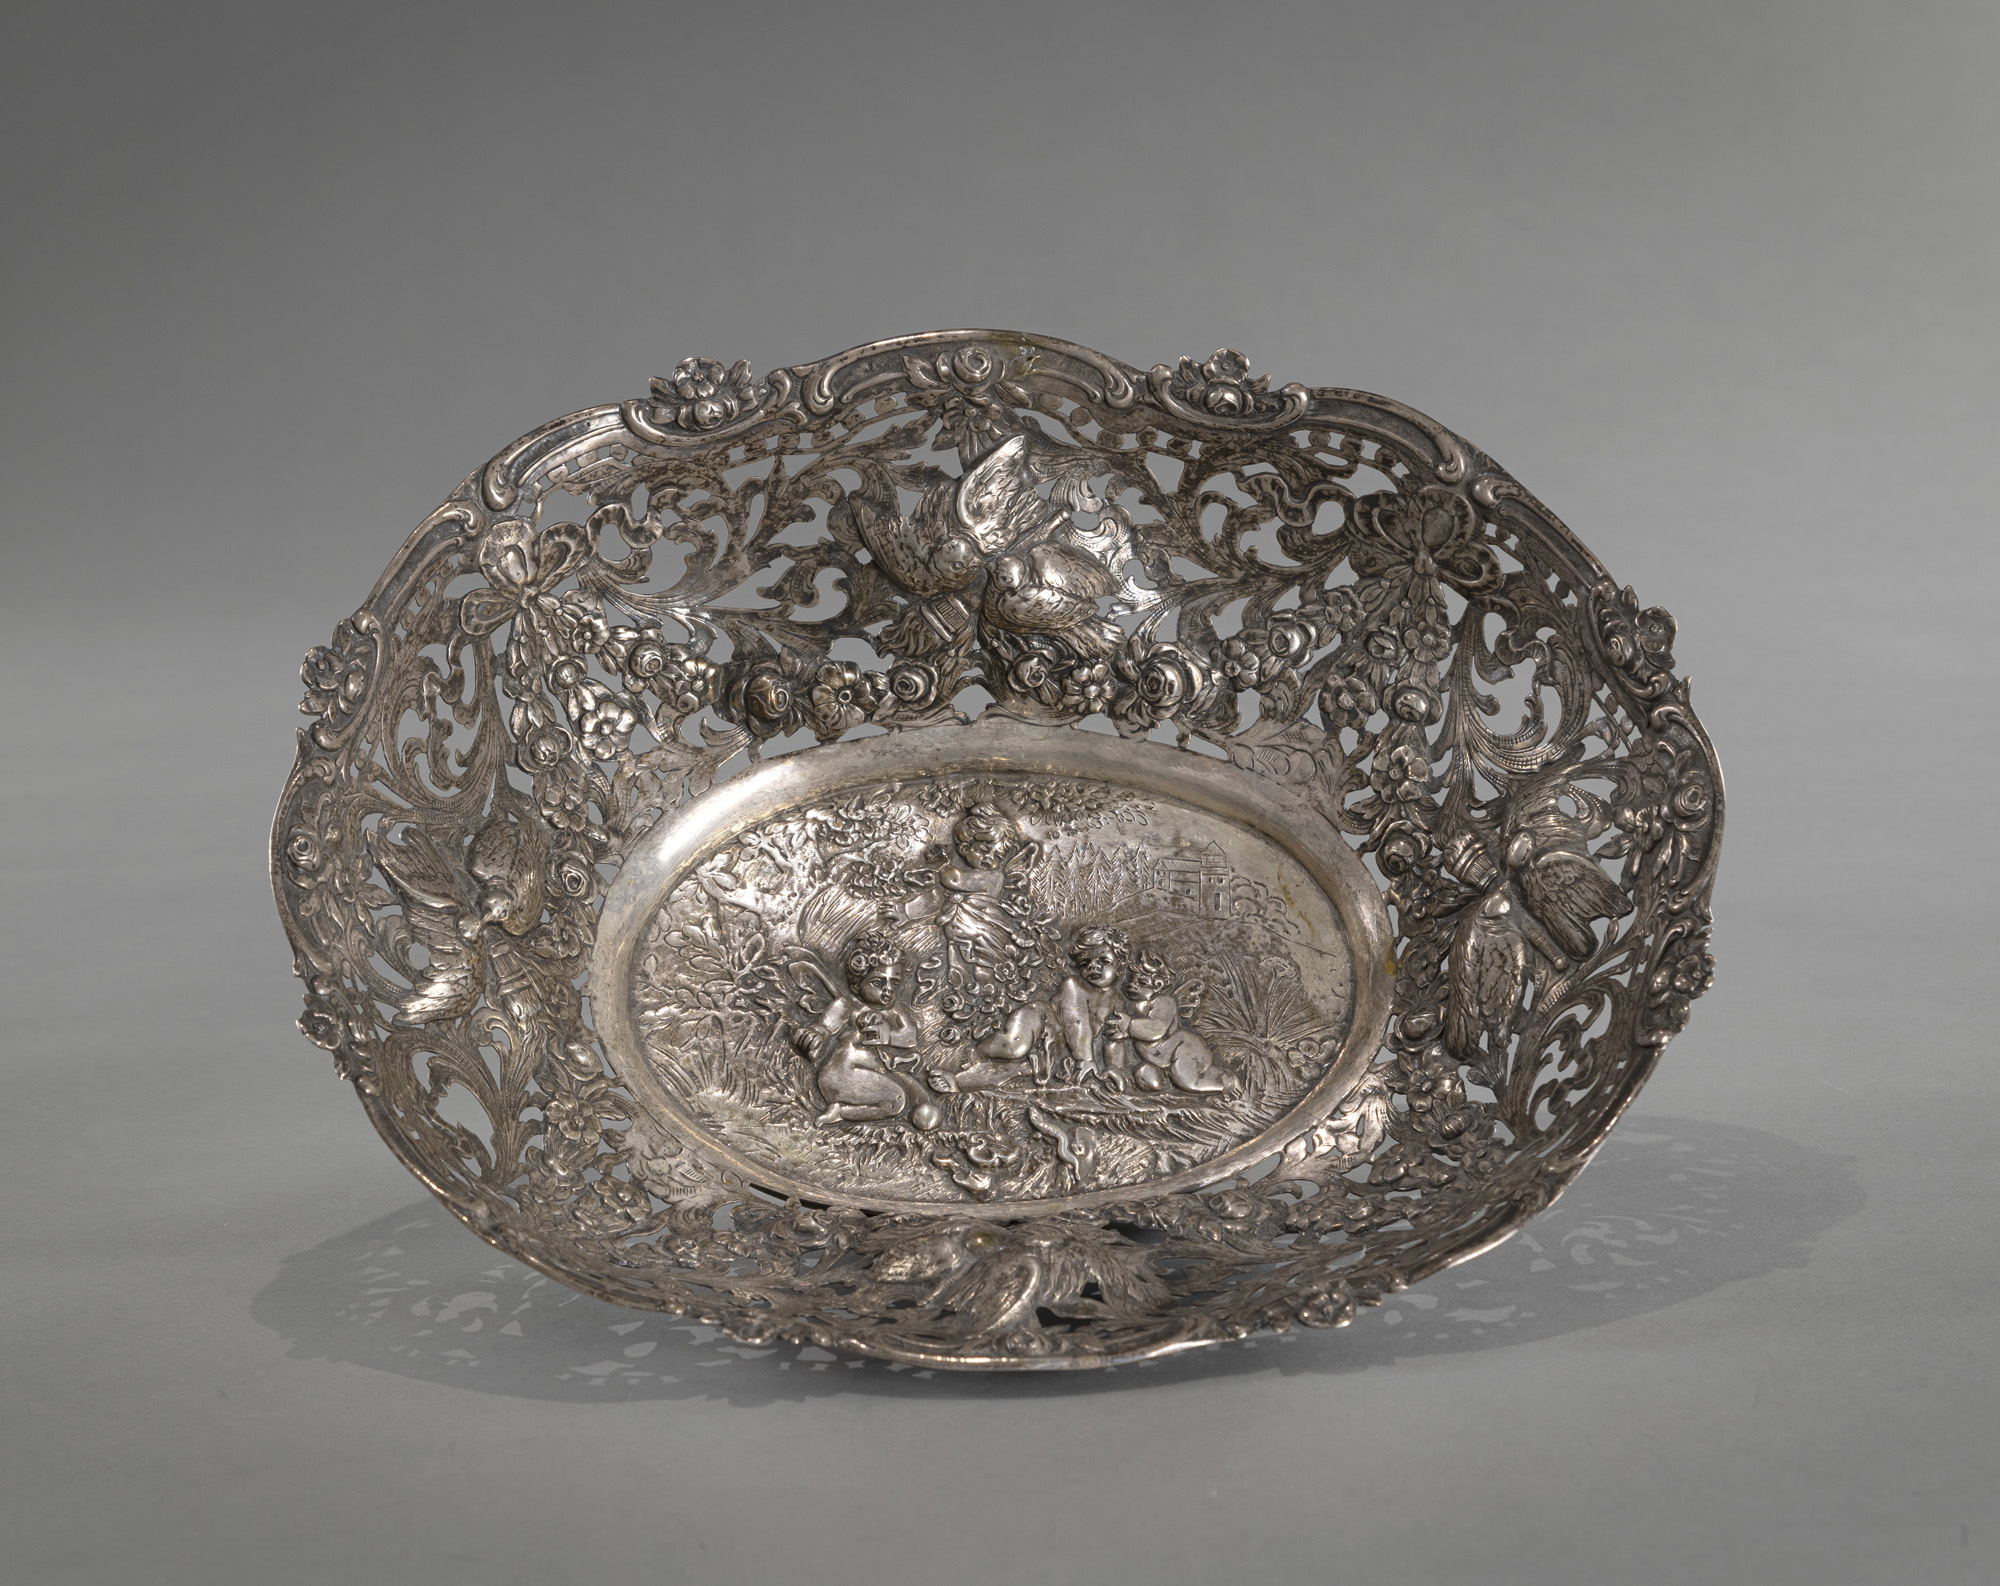 A GERMAN SILVER BASKET WITH PUTTI AND BIRD PATTERN - Image 4 of 5